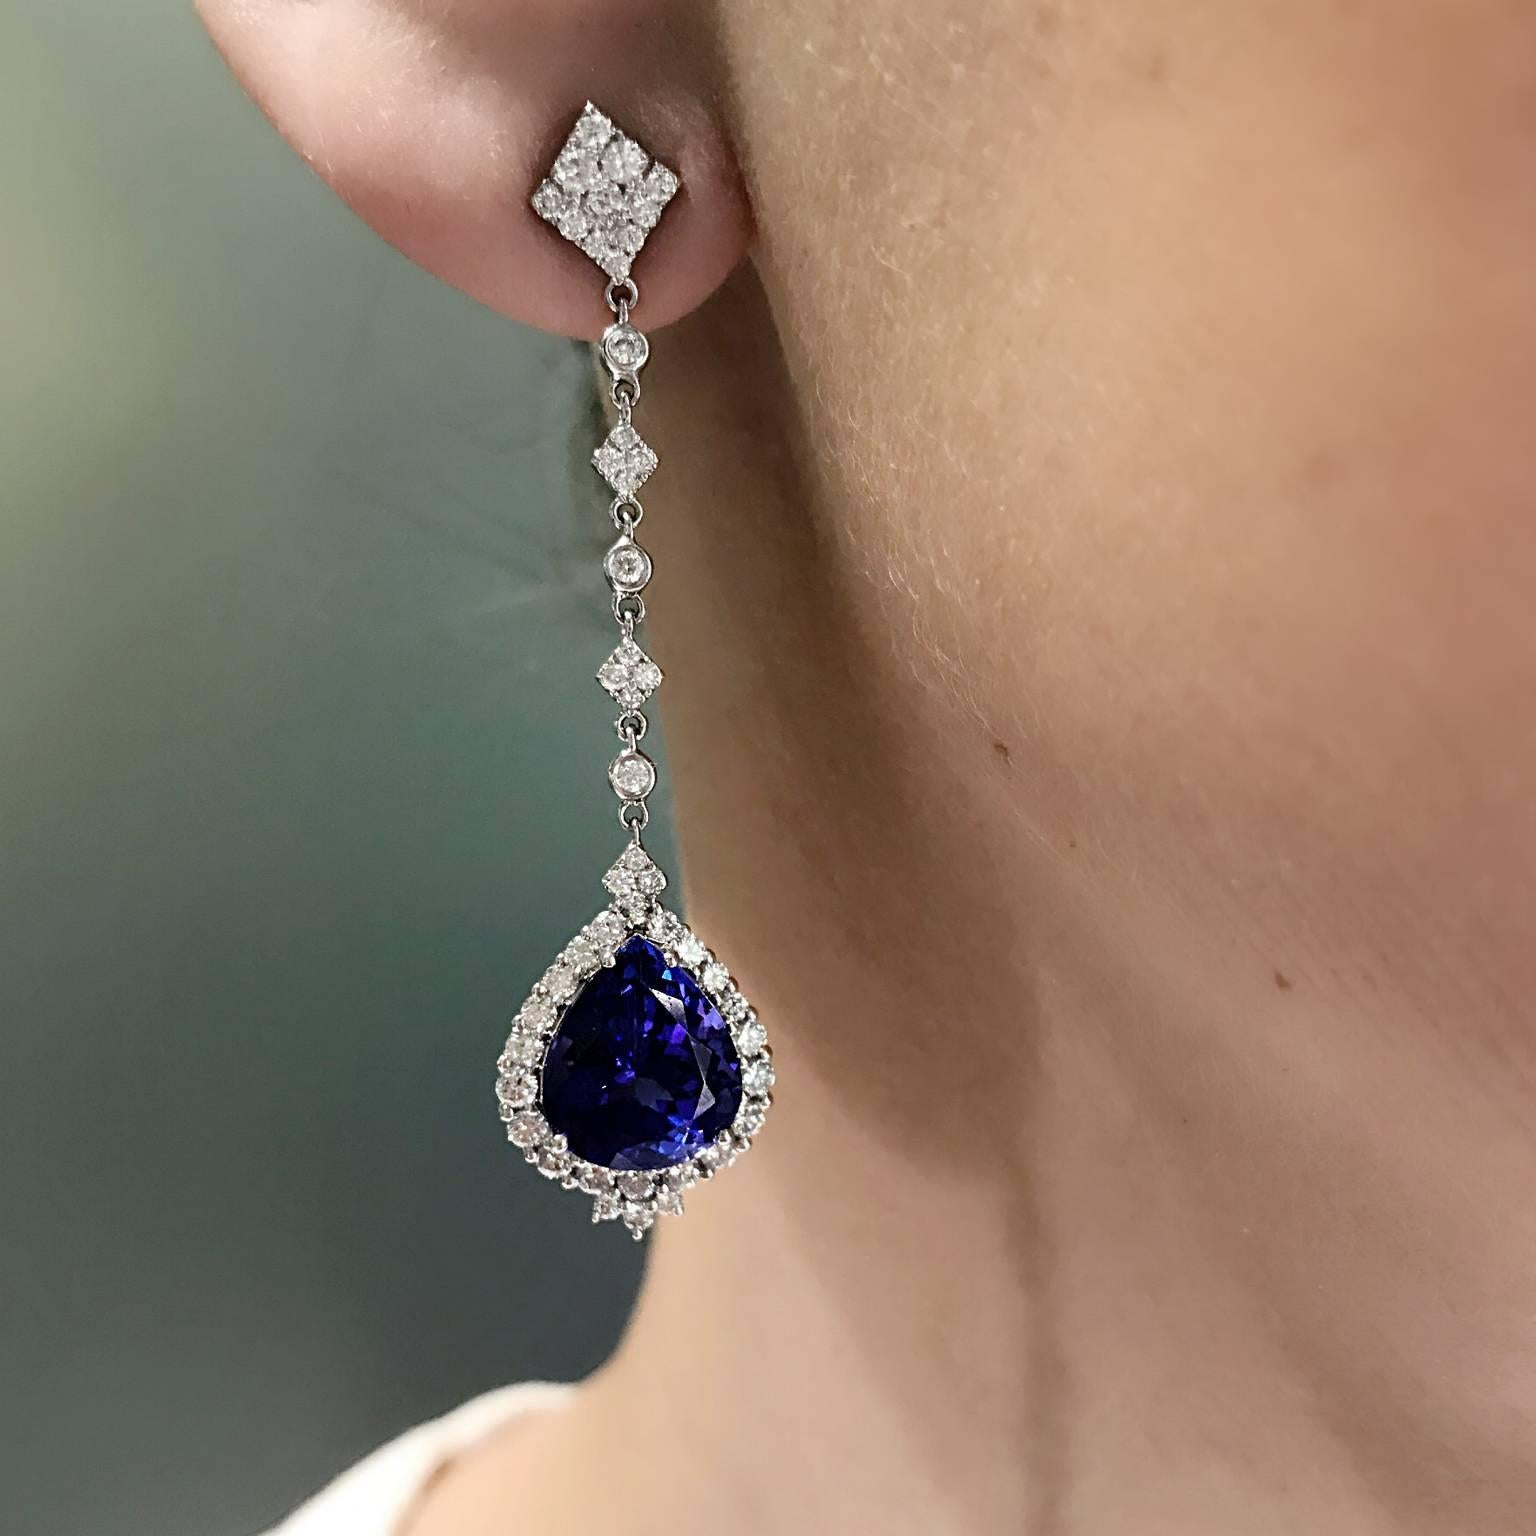 18k White Gold Tanzanite (9X12mm; 11.55cts) and Diamond (1.80cts) Drop Earrings.  Post / Clutch Back

55mm in Length
14mm in Width